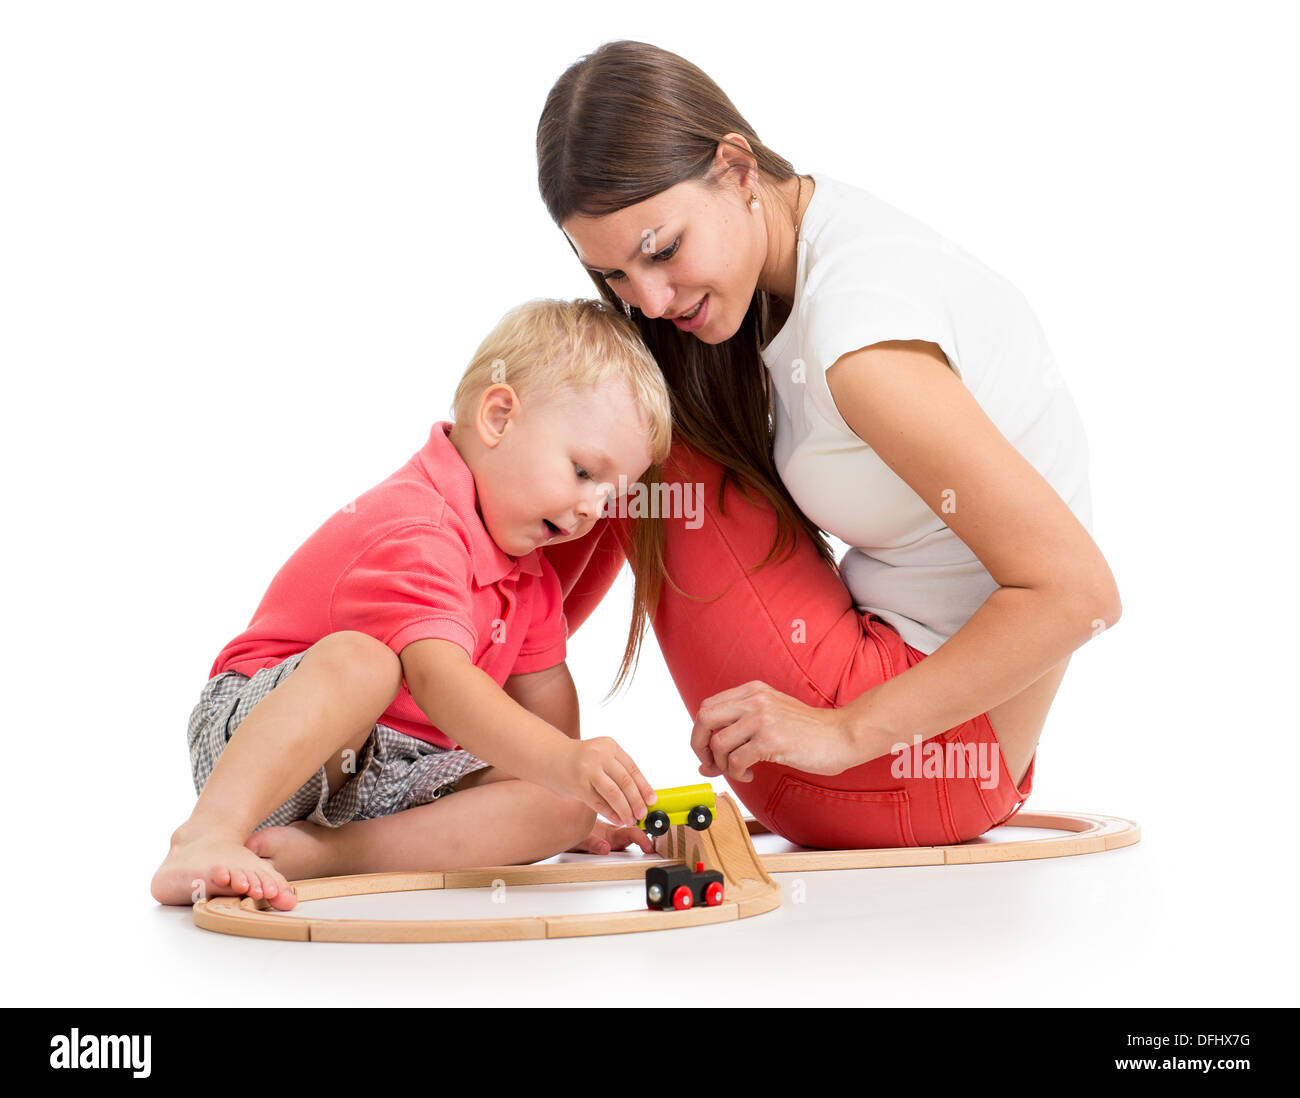 kid boy and mom play block toy Stock Photo